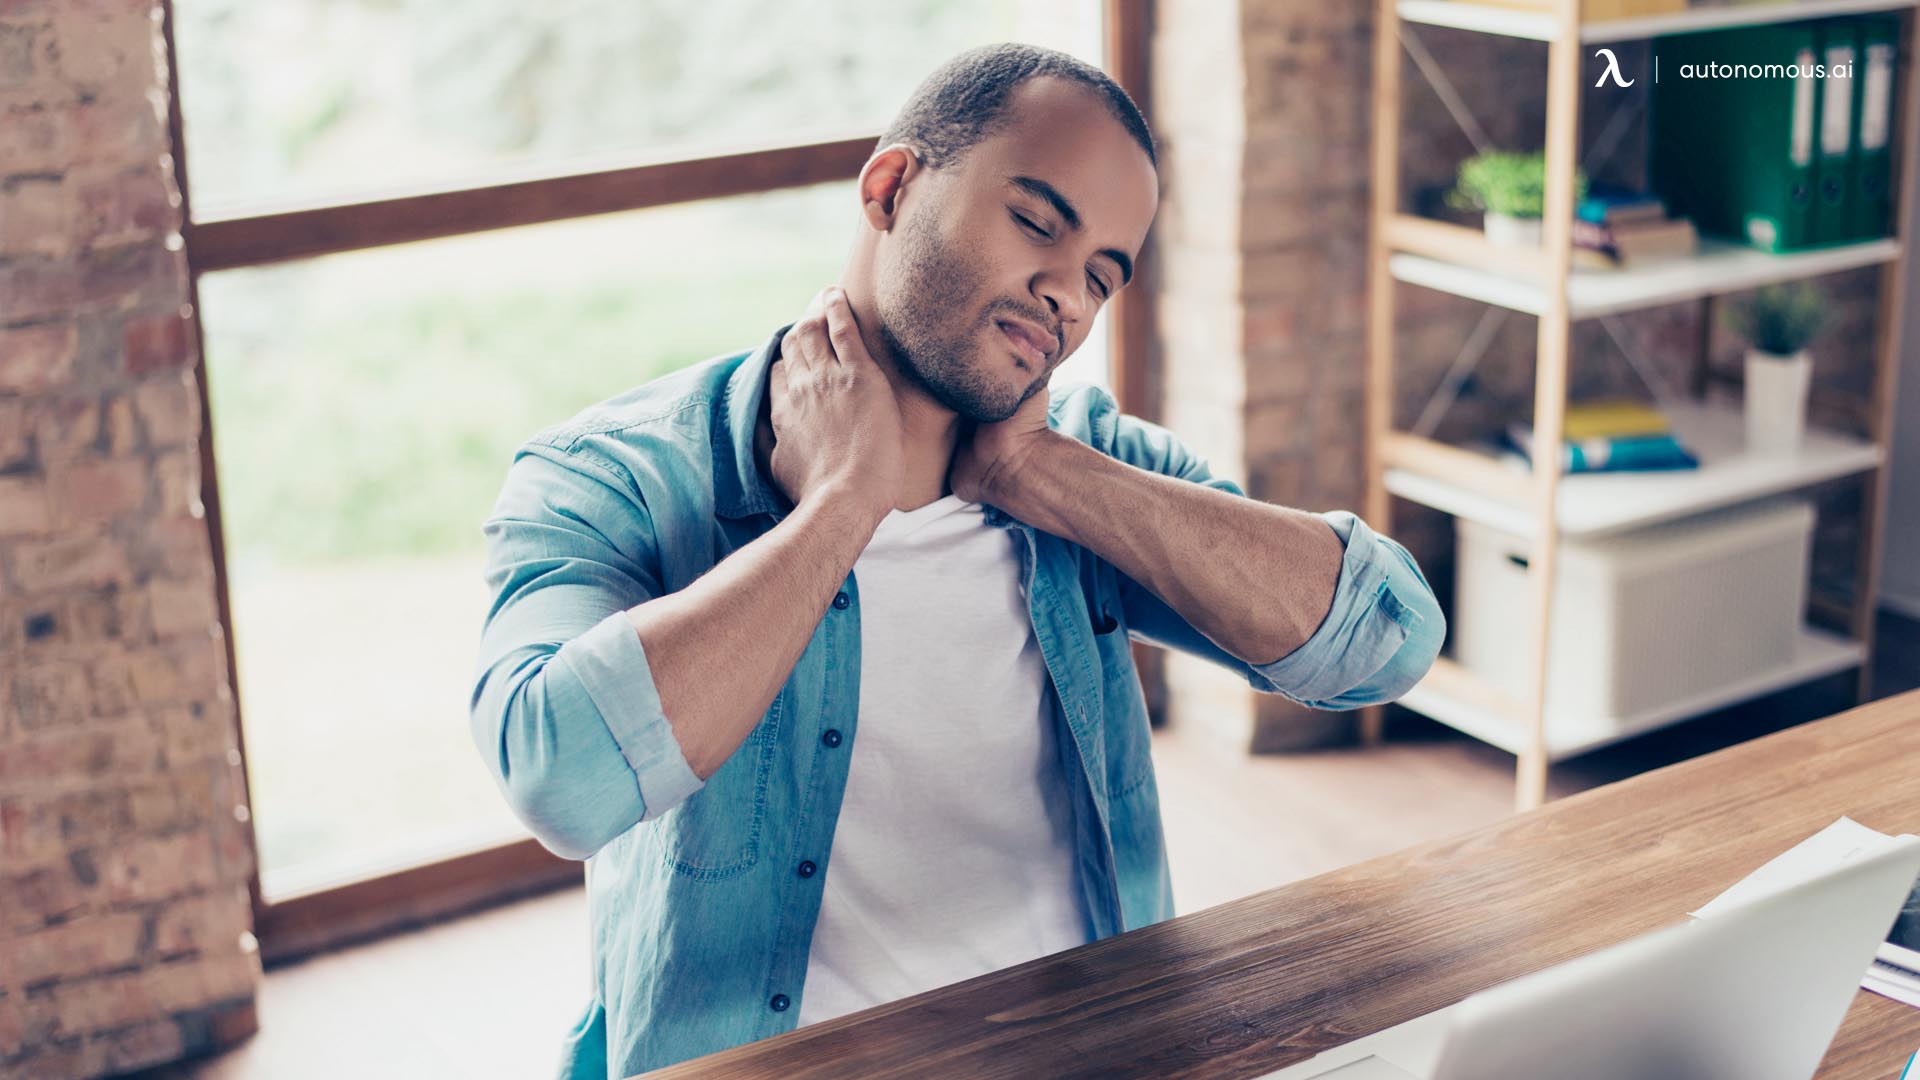 5 Simple Ways to Prevent Neck and Back Pain While Working